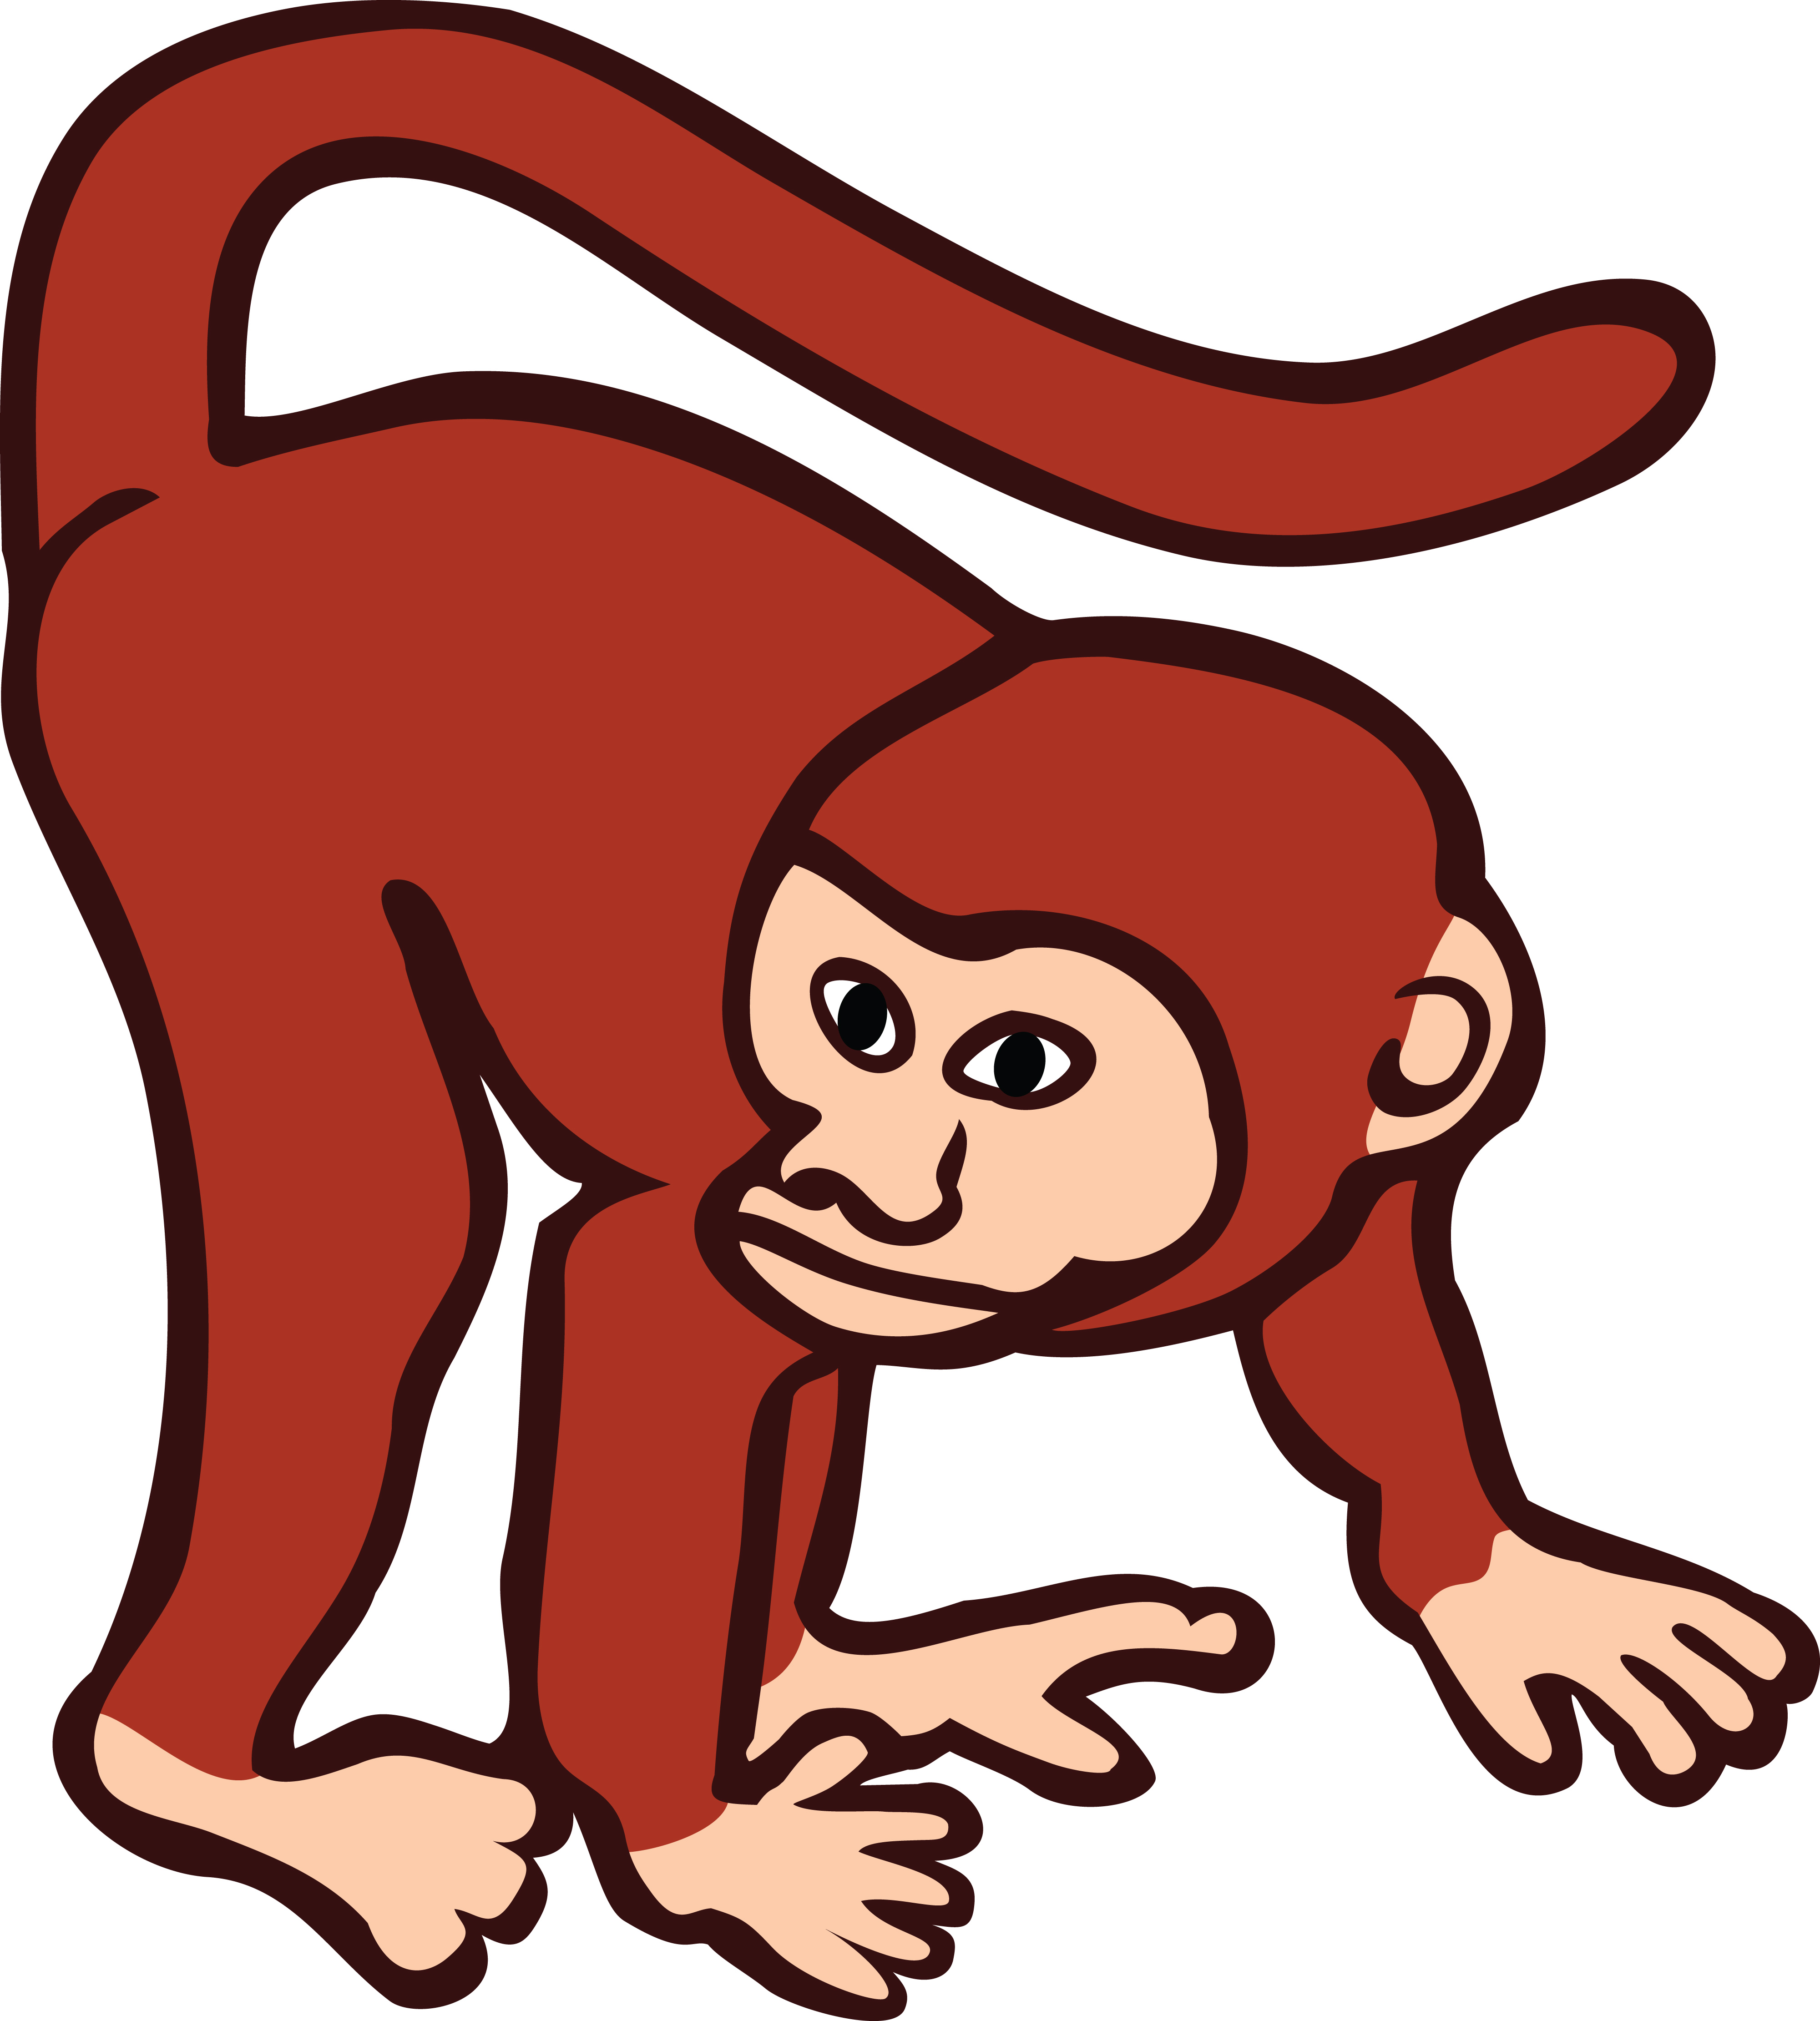 Free Clipart Of A monkey